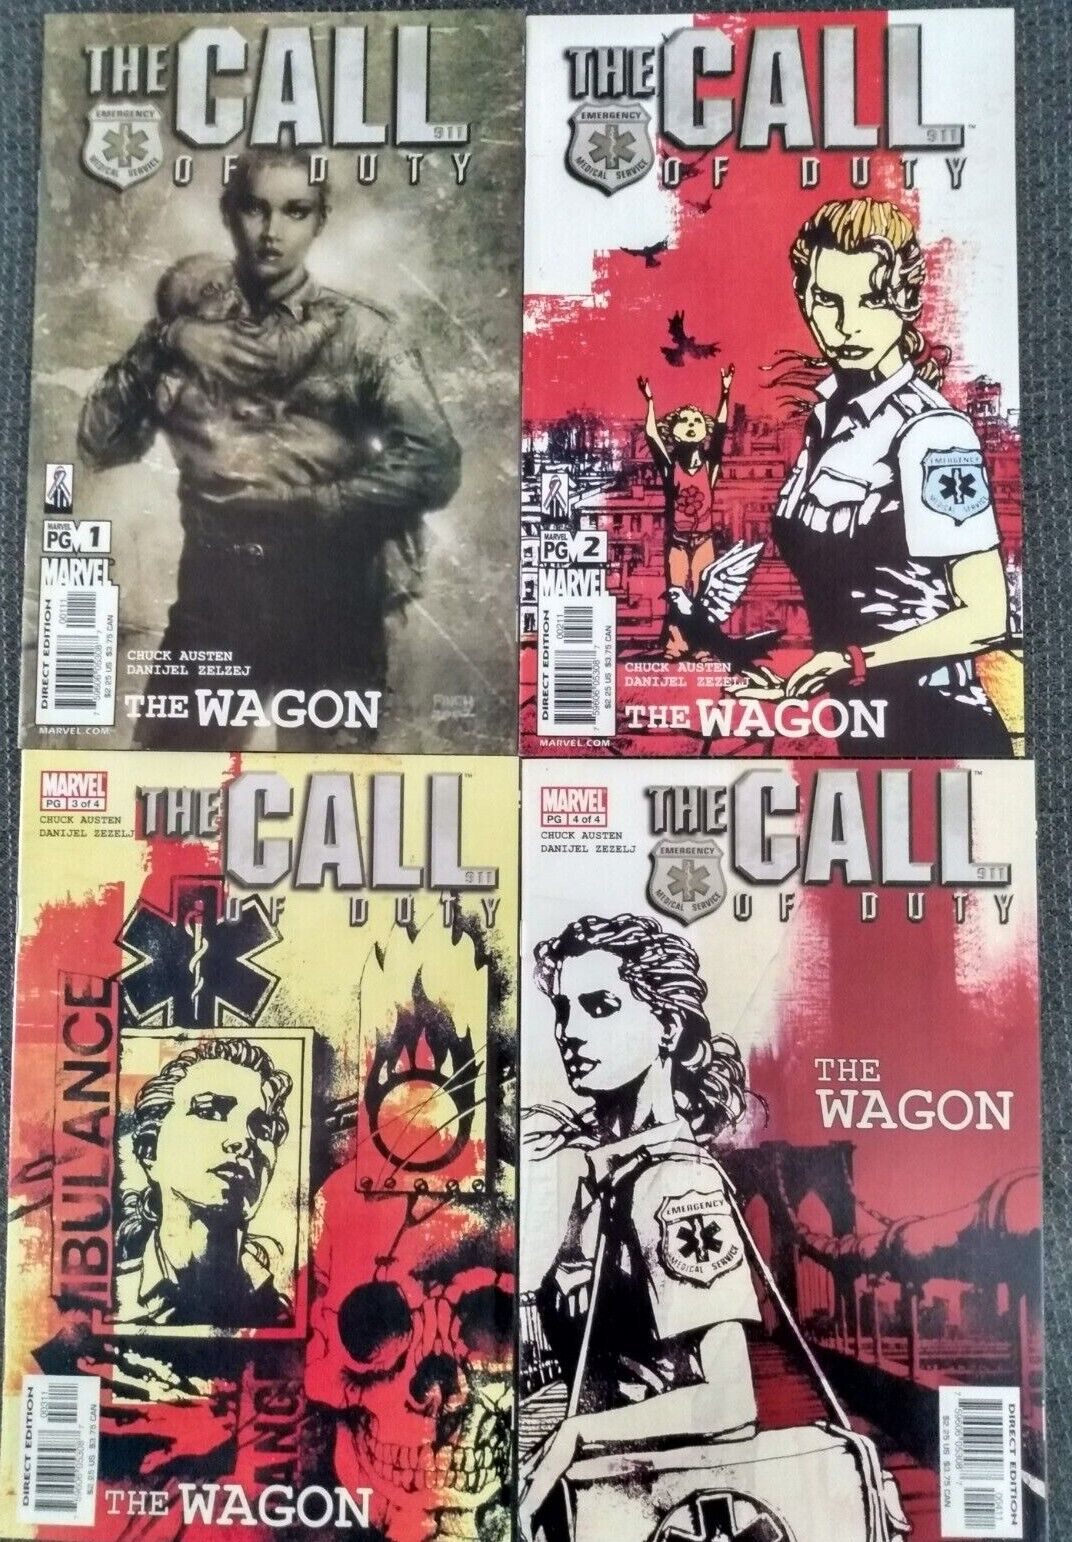 The Call of Duty: The Wagon #1-4 Marvel Comic Books 2002/03